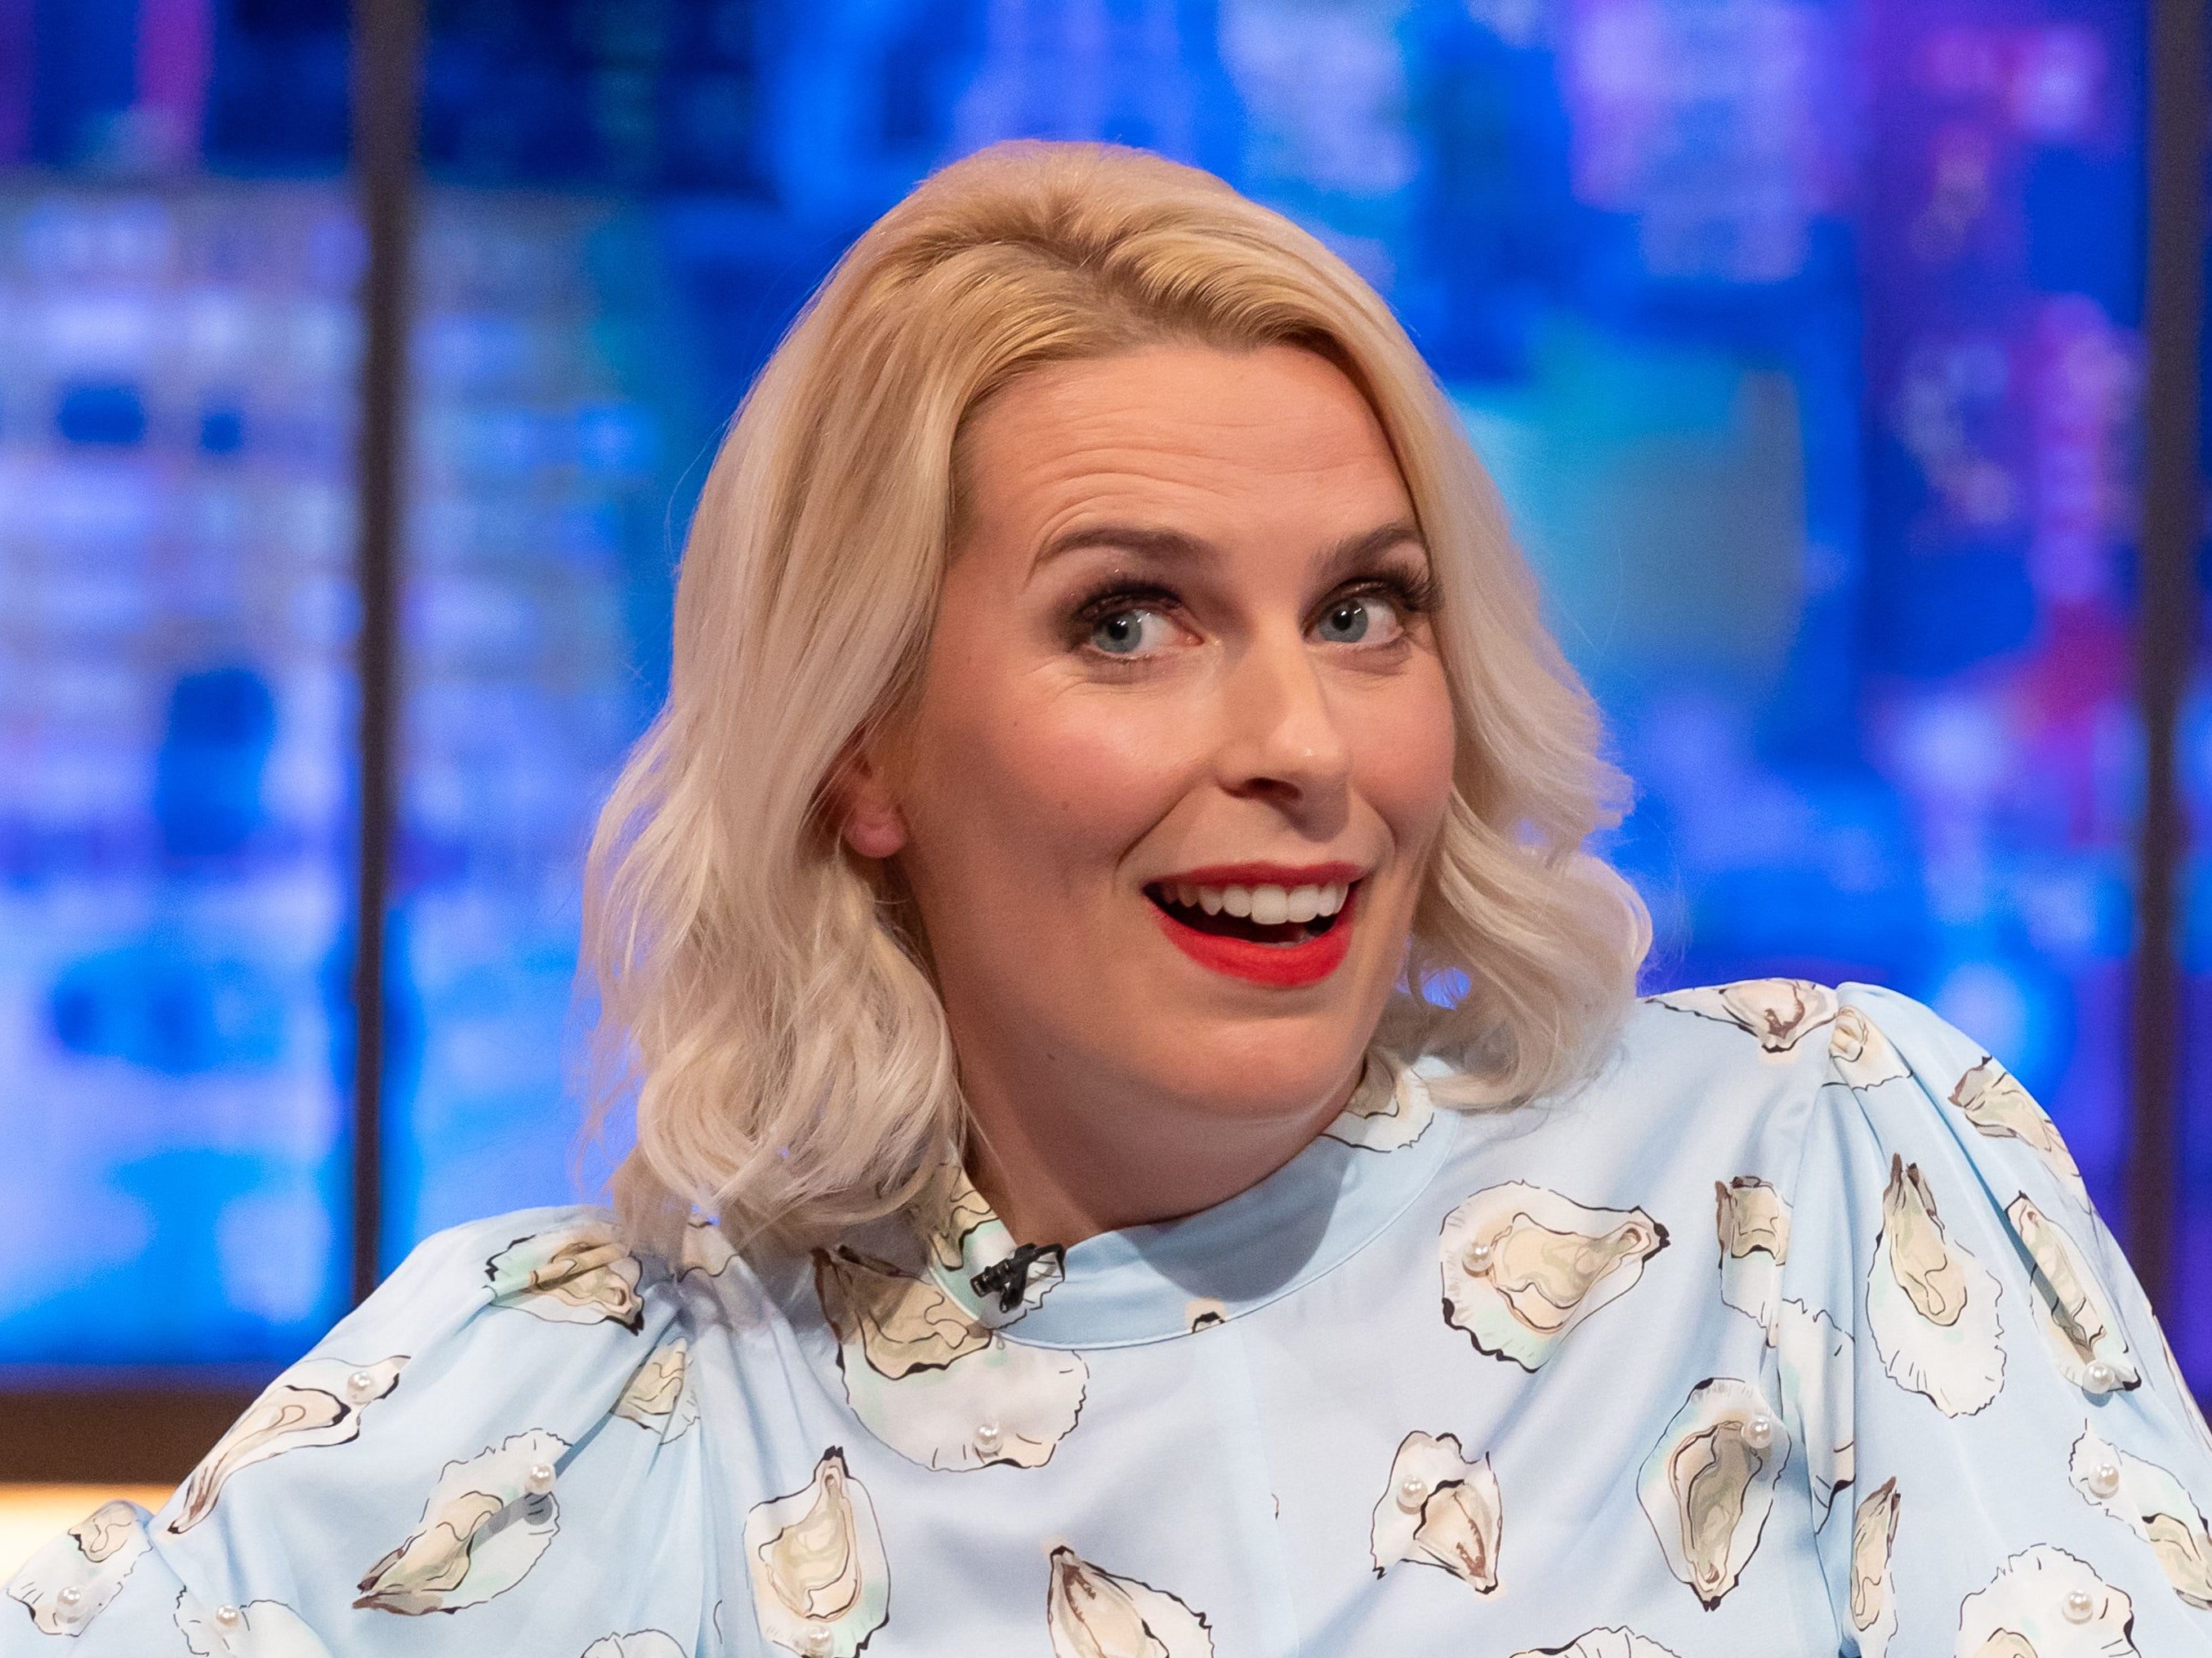 Sara Pascoe says there are predators in the comedy industry